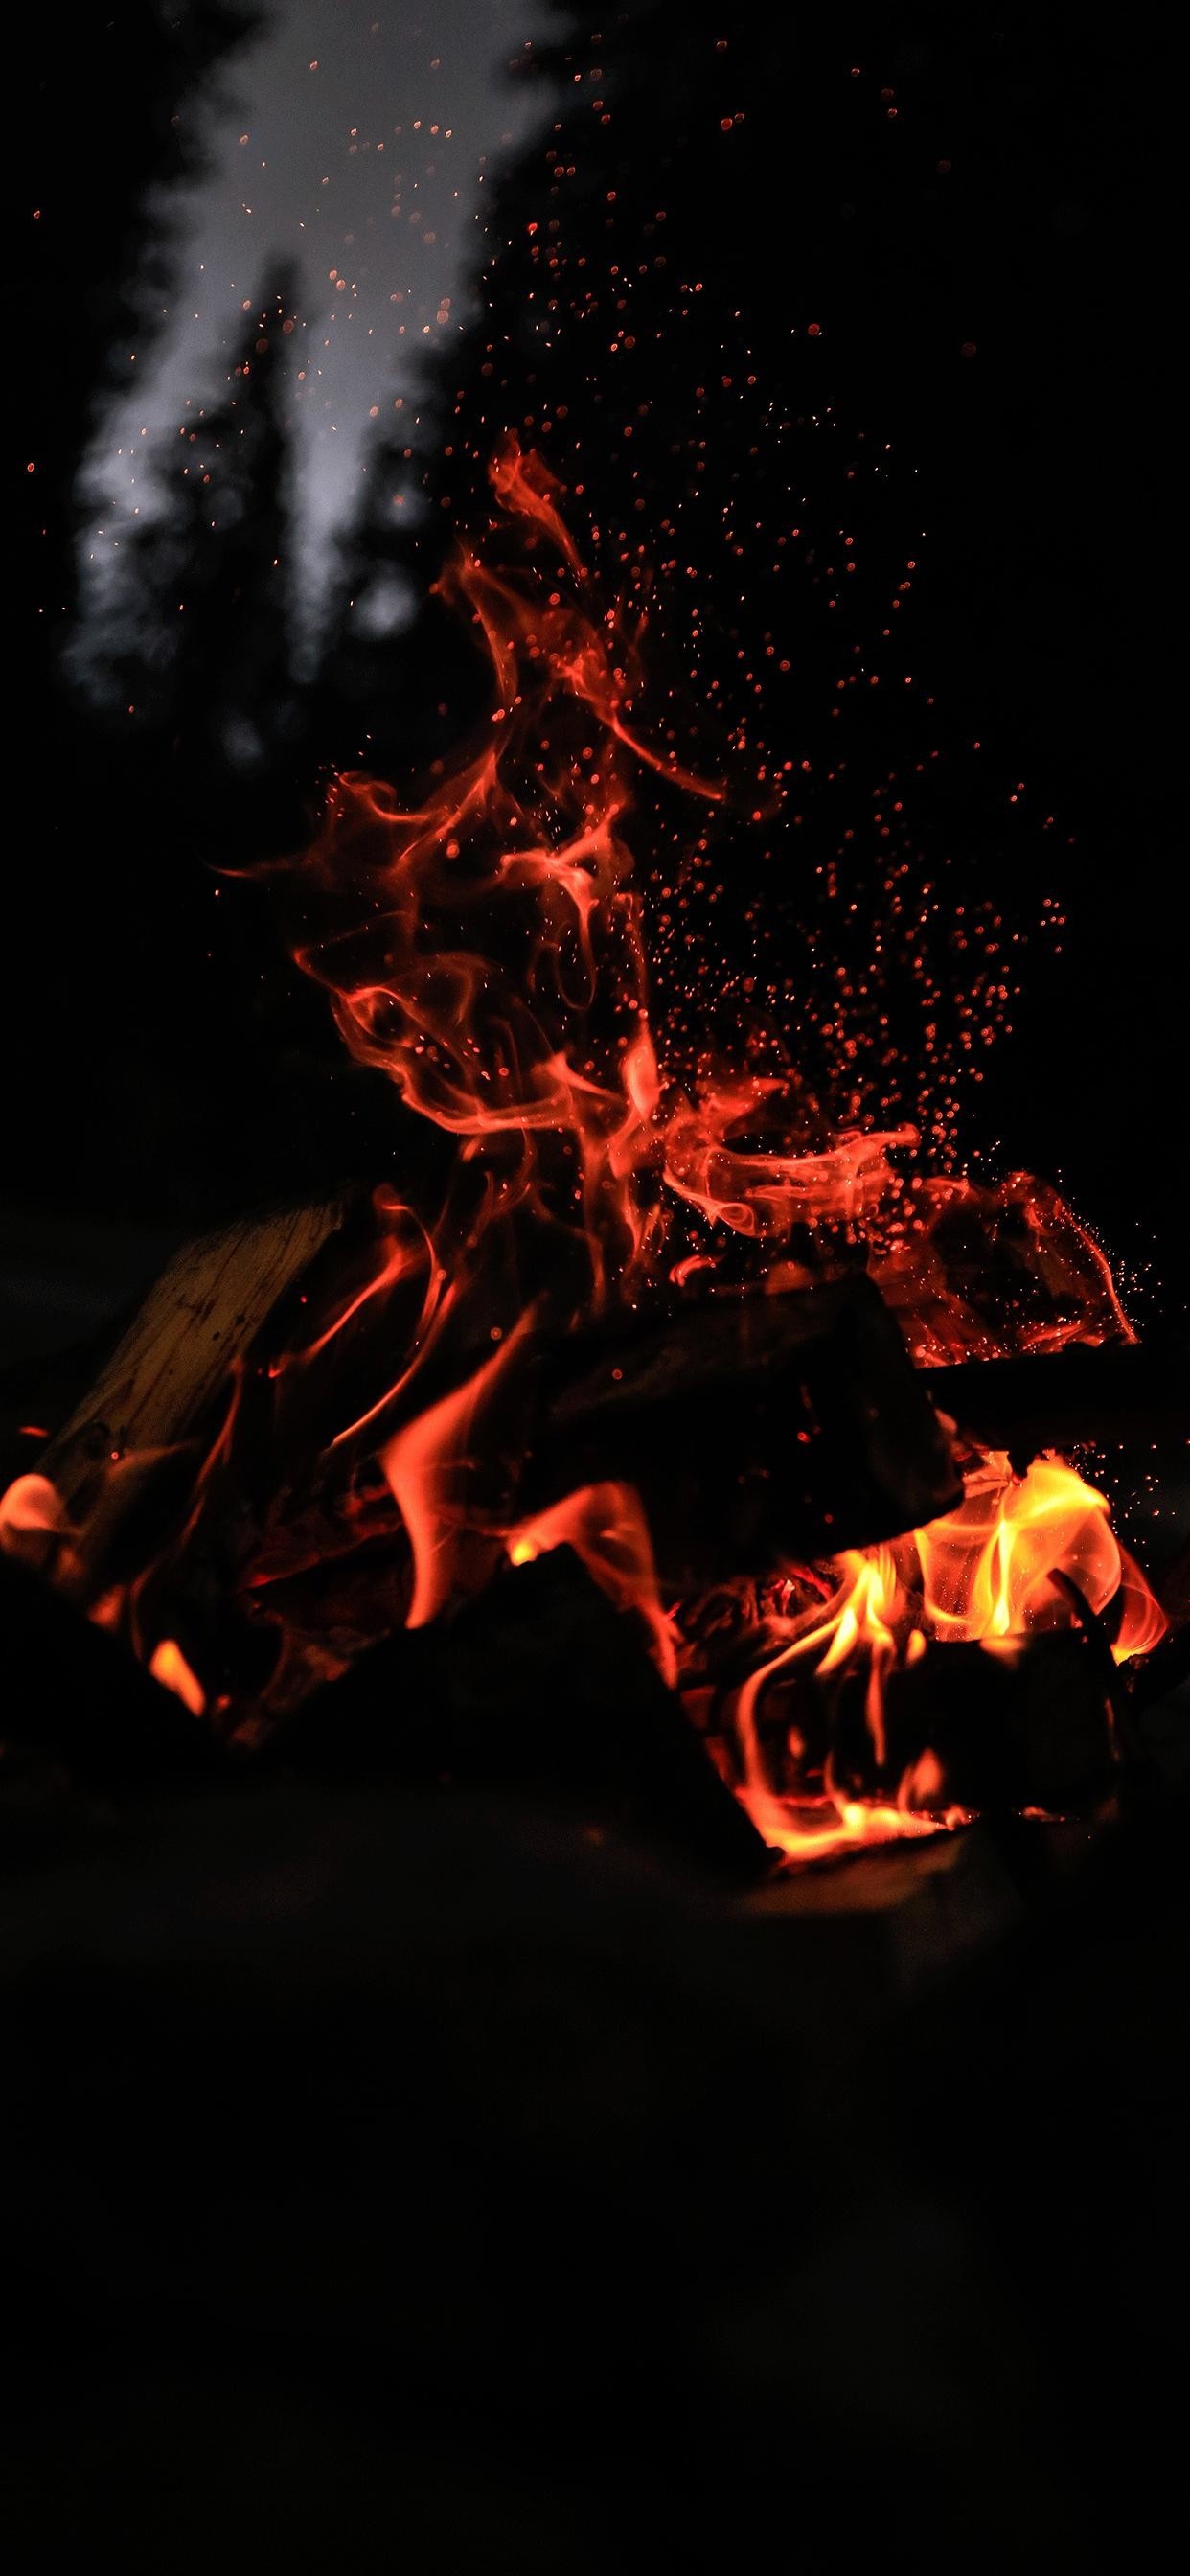 Fire wallpapers, Stunning visuals, Intense flames, Dynamic backgrounds, Captivating fire, 1250x2690 HD Phone